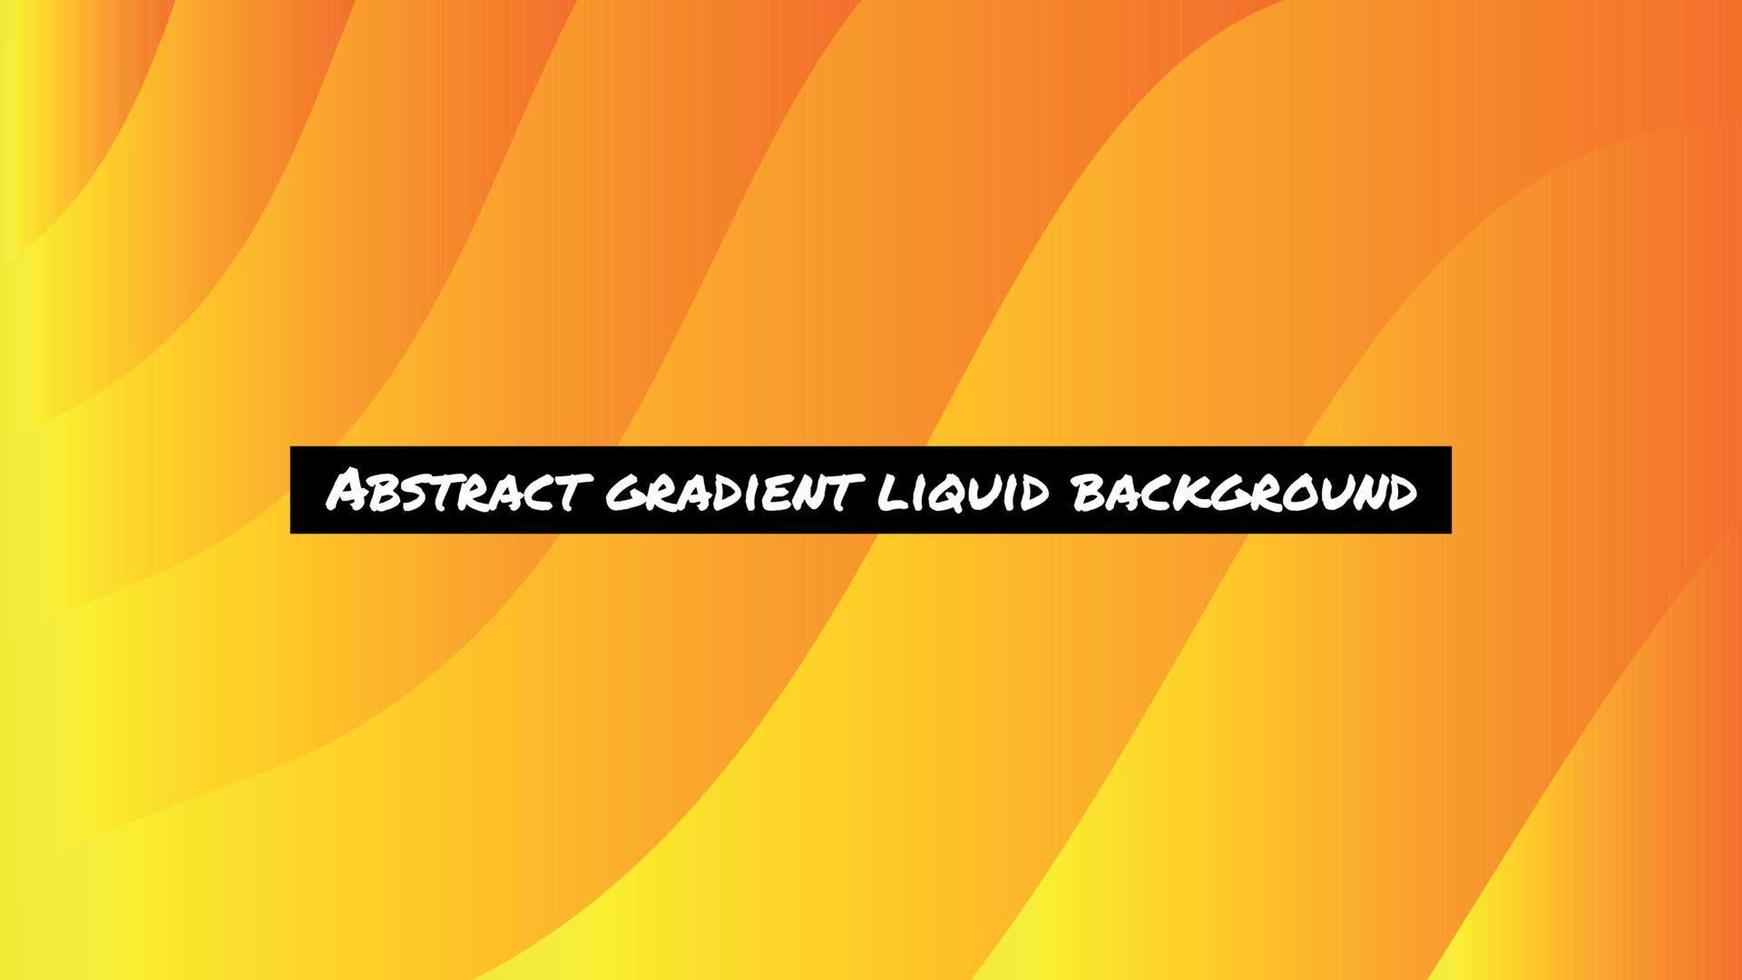 Abstract gradient liquid background in bright colors vector